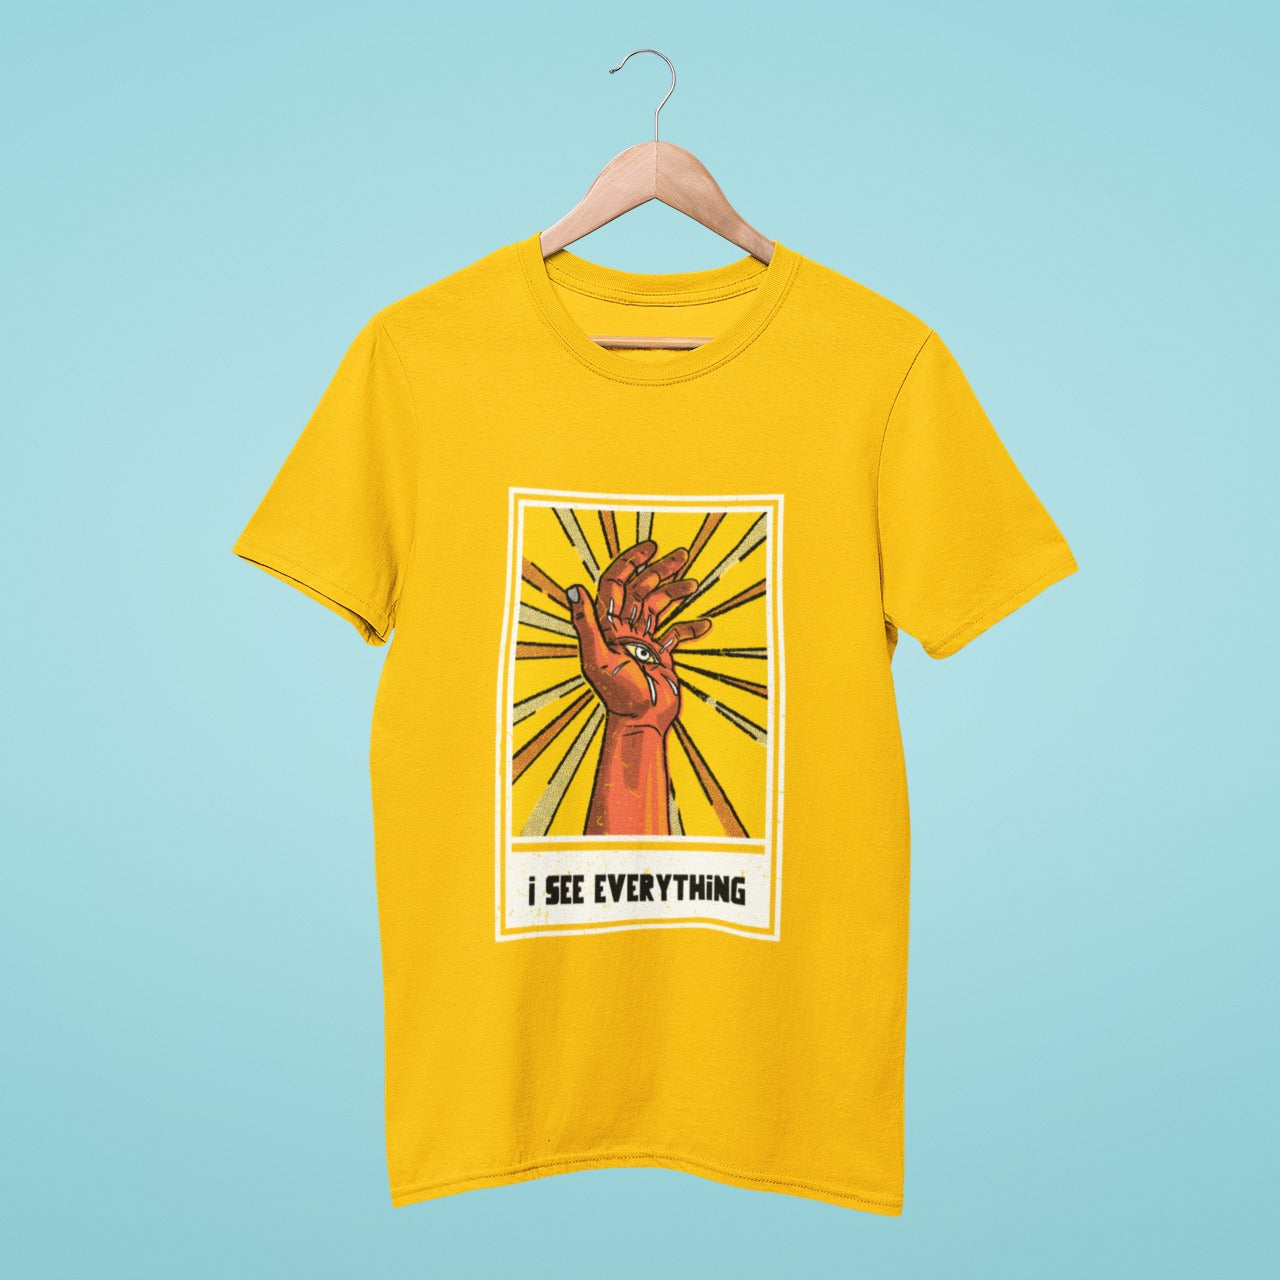 See everything with this bold yellow t-shirt featuring an eye and hand graphic. The 'I see everything' slogan is sure to turn heads and make a statement. Perfect for those who like to keep their eye on the prize.